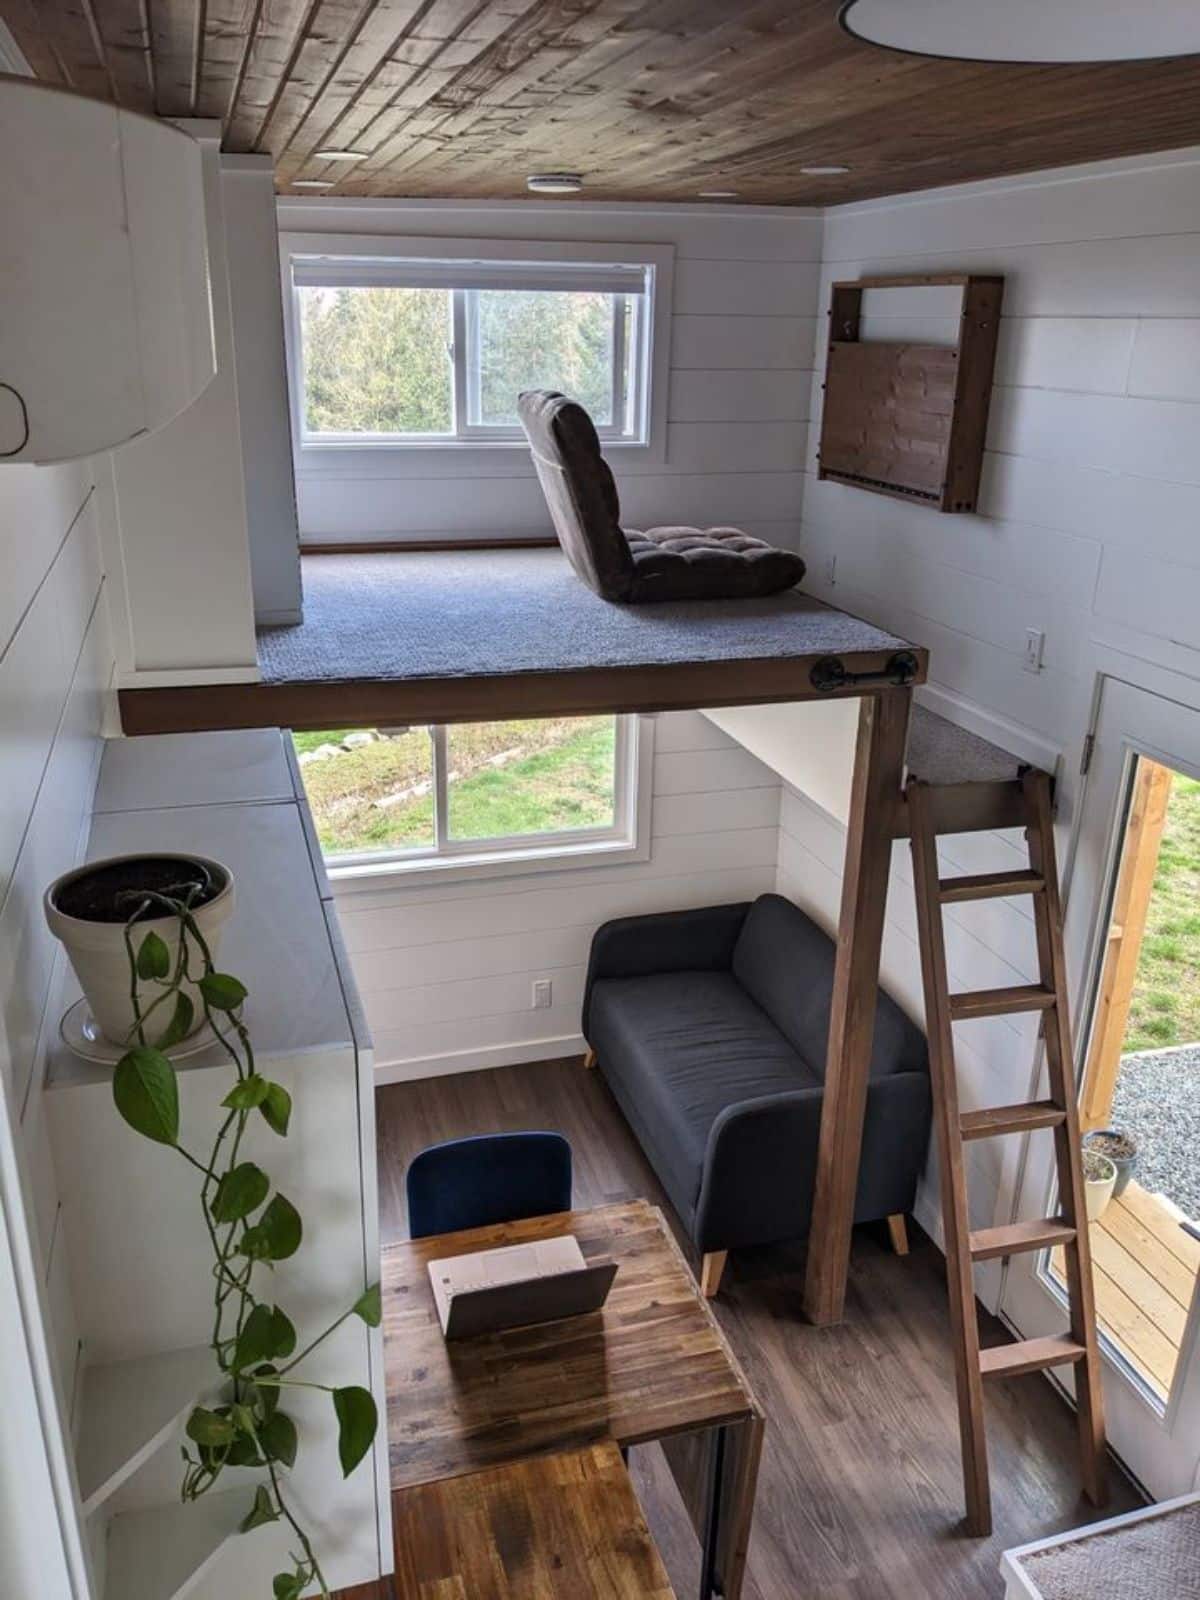 smaller loft is above the living area can be an additional living cum sleeping cum work space